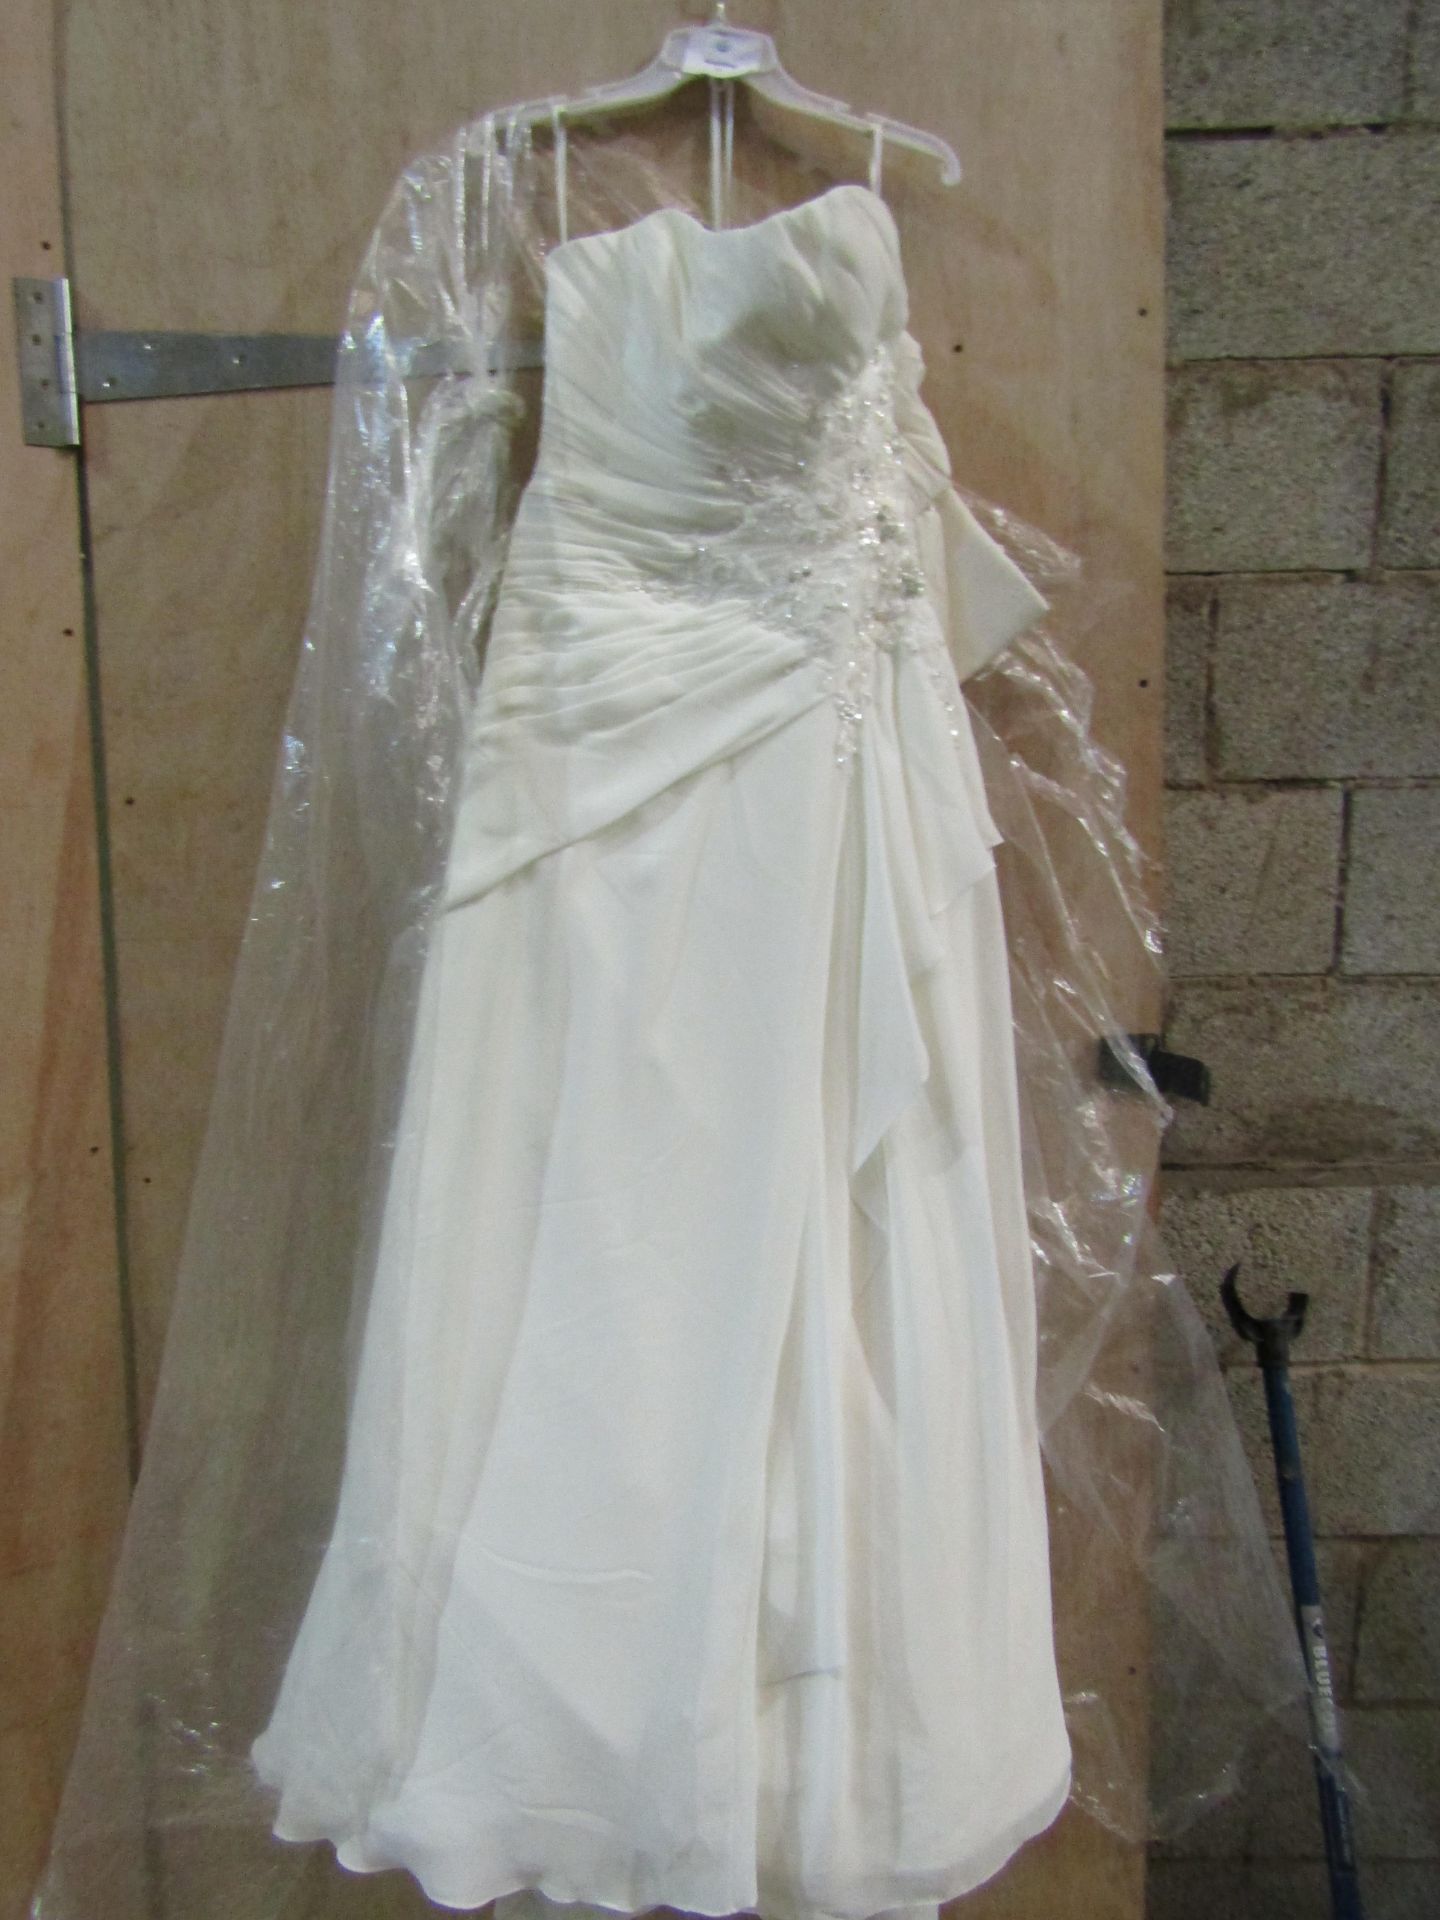 Approx 500 pieces of wedding shop stock to include wedding dresses, mother of the bride, dresses, - Image 108 of 108